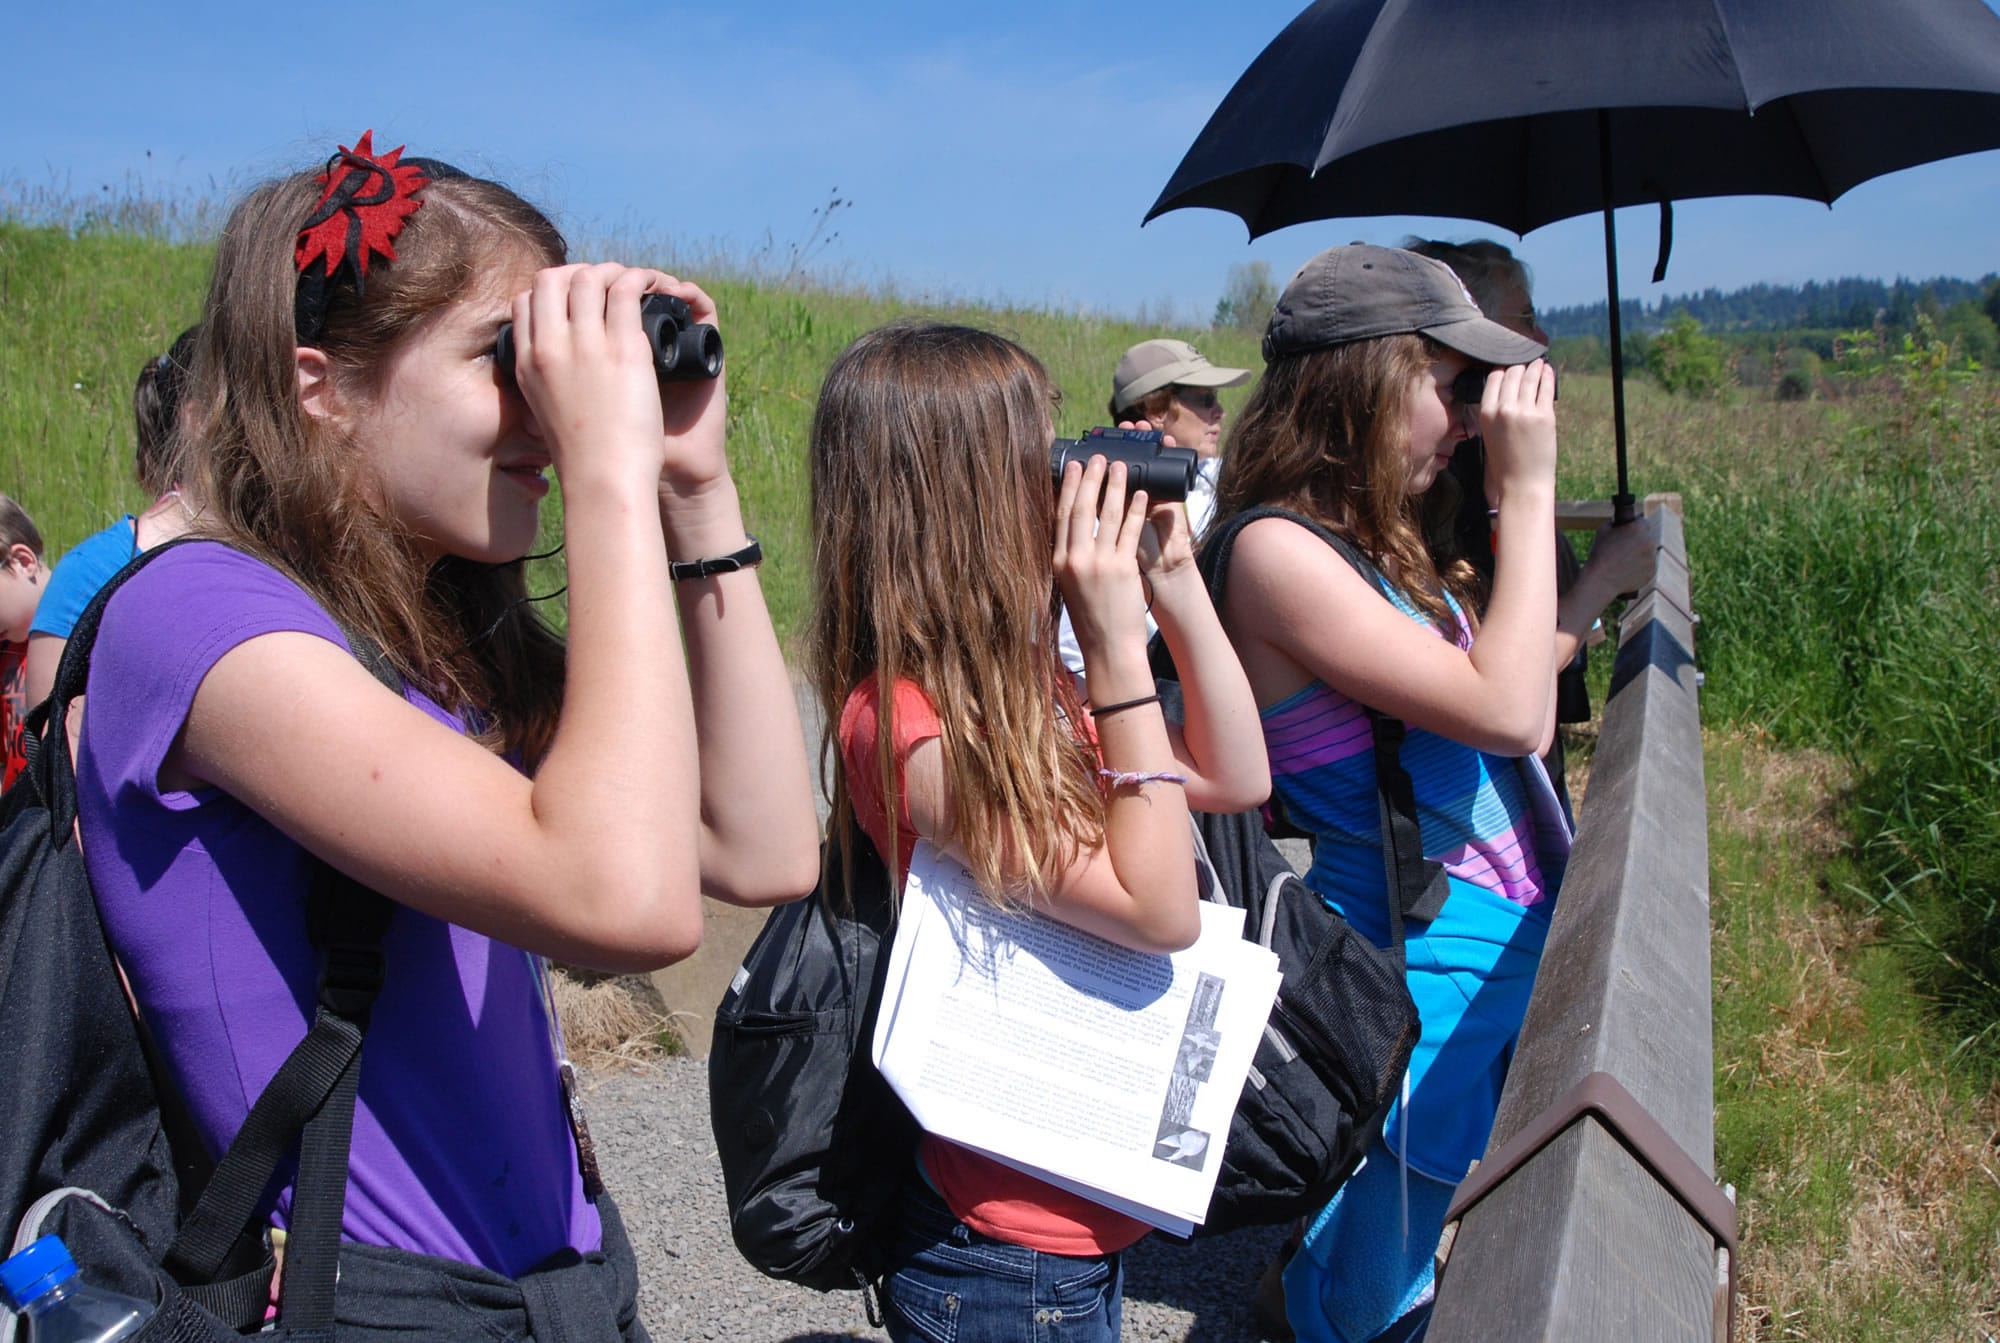 Washougal: Canyon Creek Middle School sixth-graders Rachel McDonald, from left, Allie DuBose and Audrey Hinchliff get a closer look at nature with binoculars during outdoor school, held June 6 and 7 at Steigerwald Lake National Wildlife Refuge and Beacon Rock State Park.